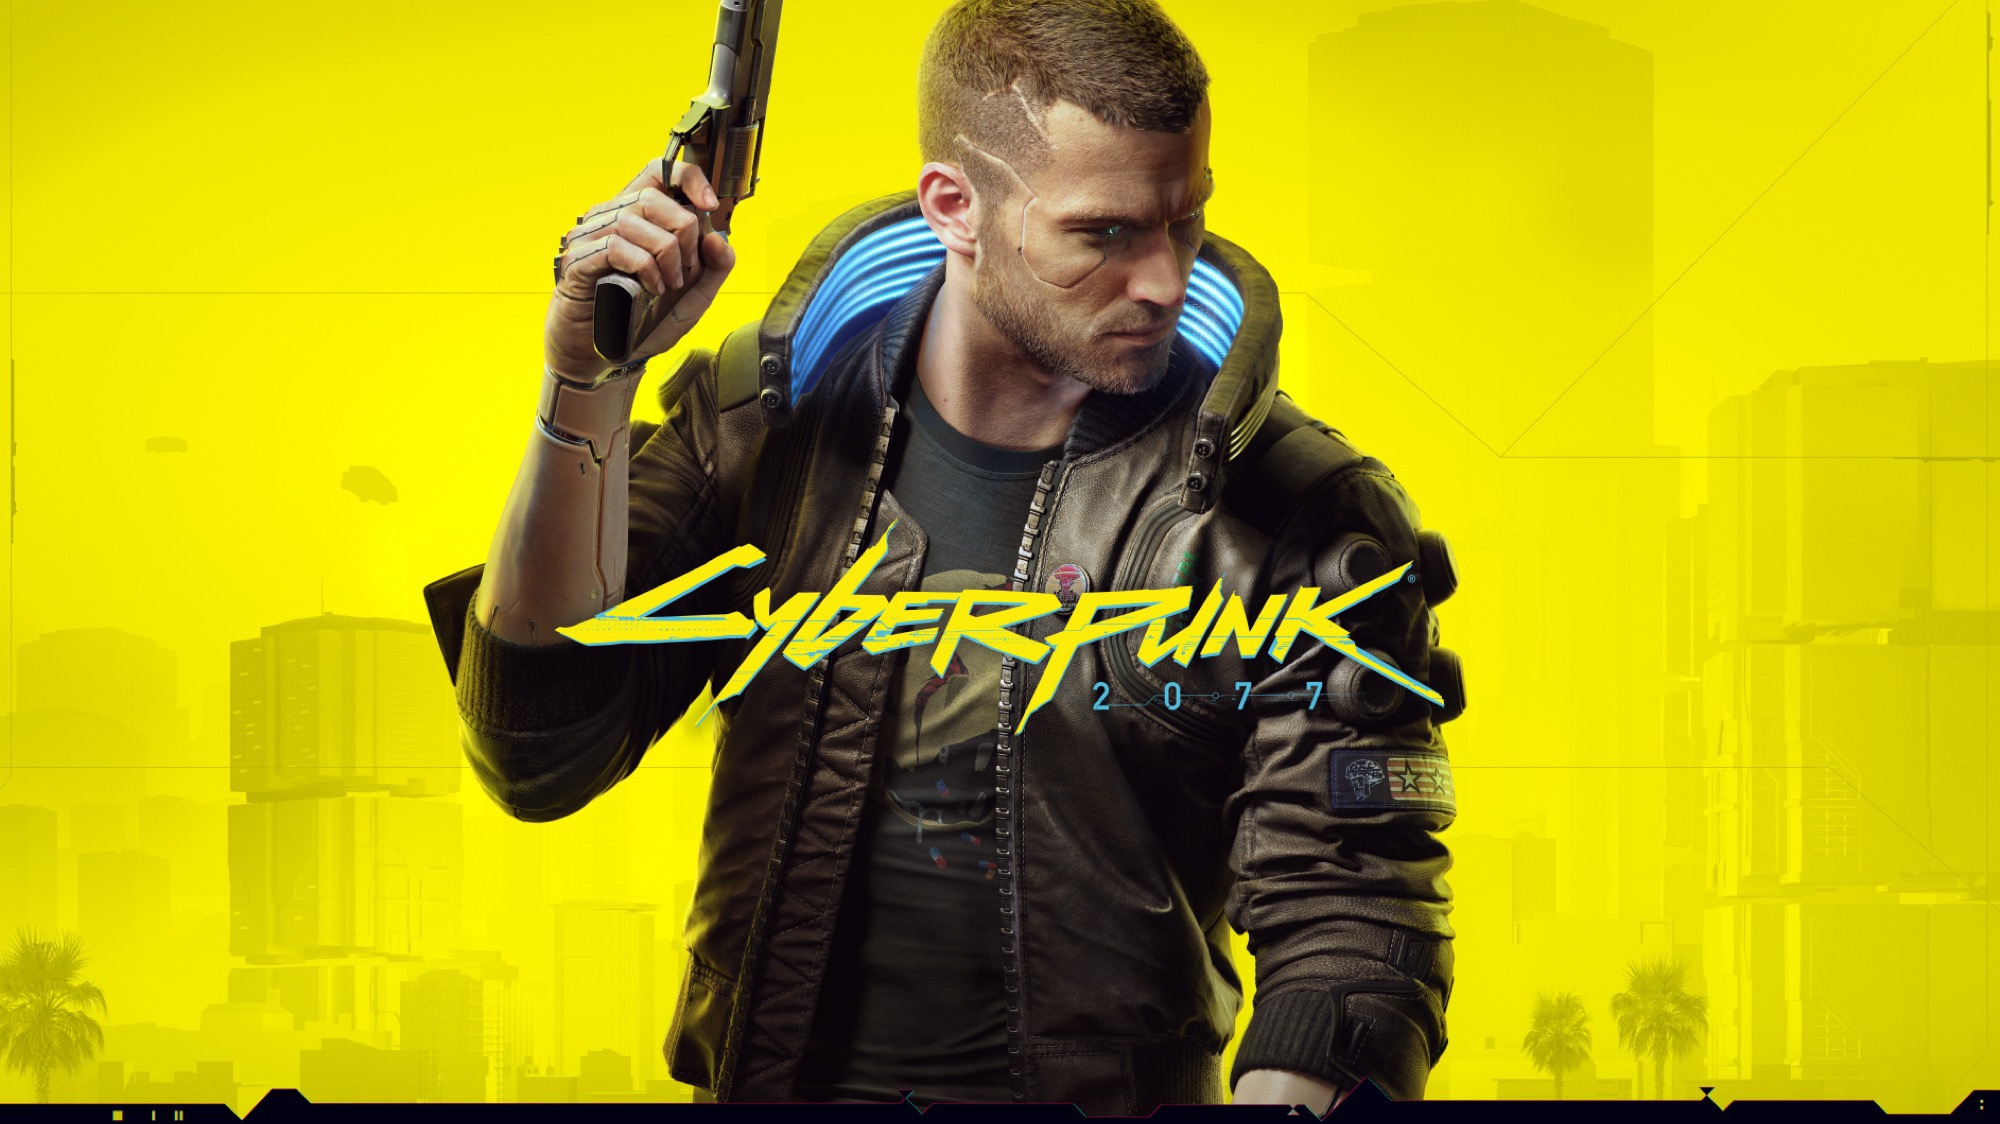 Cyberpunk 2077 PS5 And Xbox Series XS Update Is Out Now With Ray Tracing,  4K, Faster Load Times - GameSpot